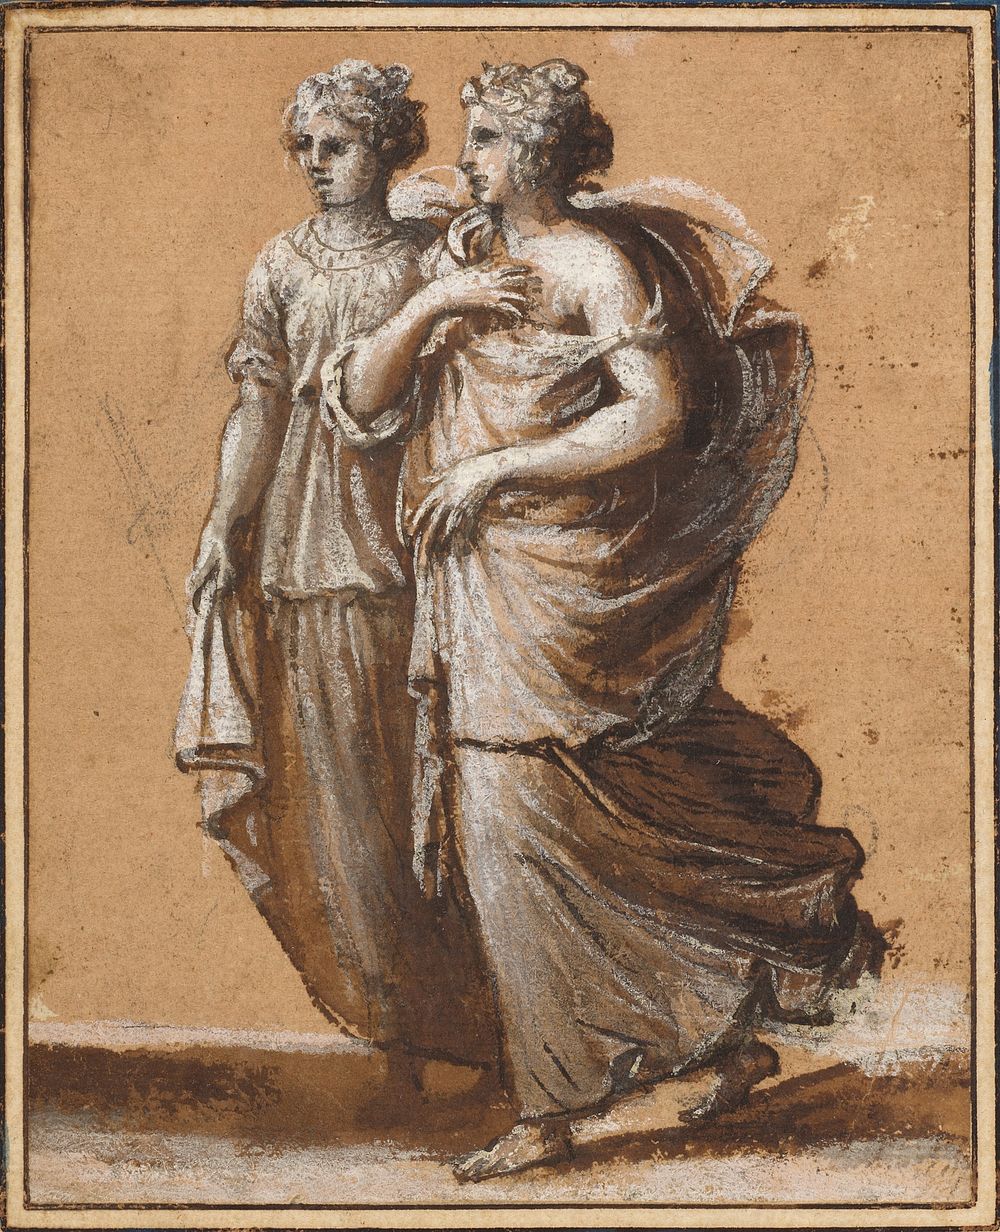 Two Women in Classical Dress during mid 1640s drawing in high resolution by Claude Lorrain.  